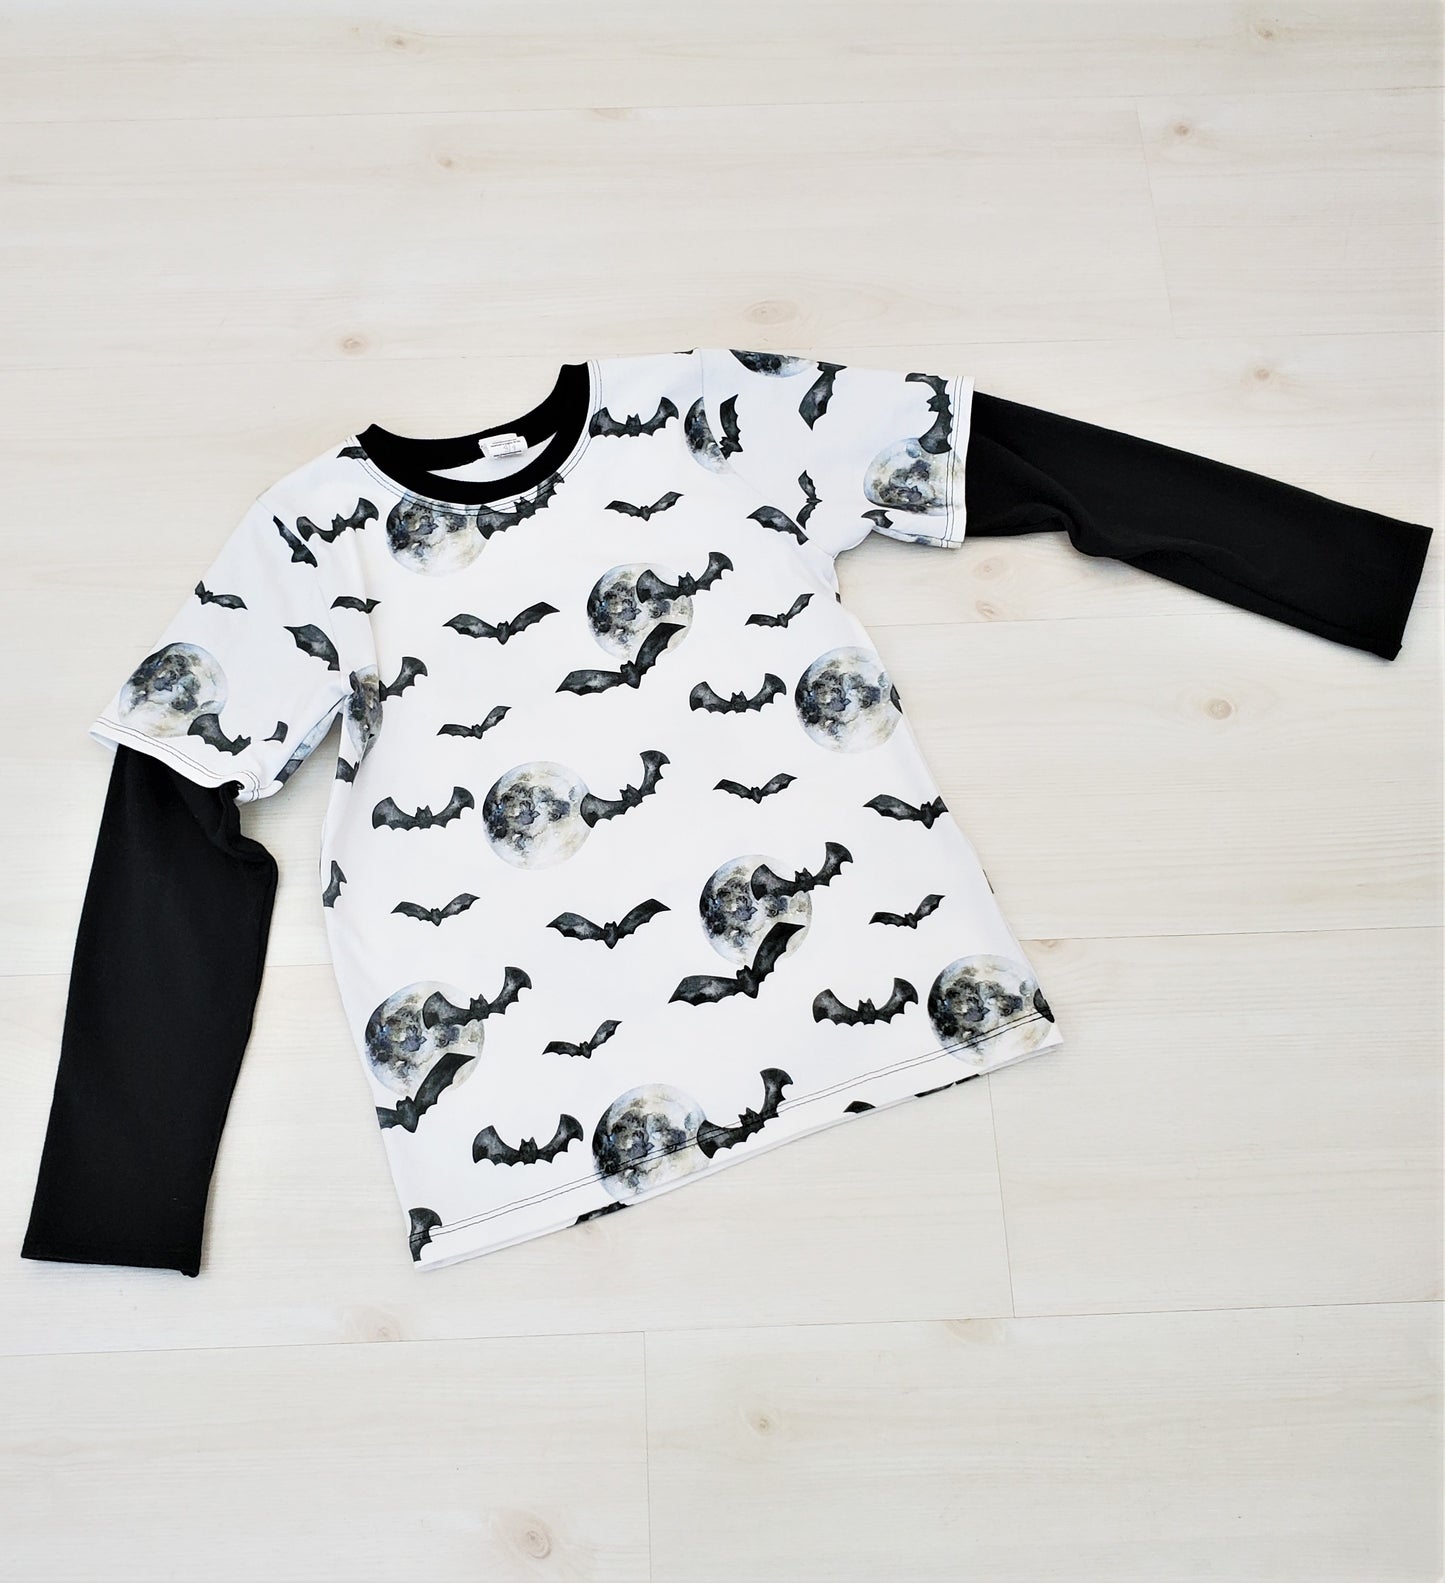 Moon and Bats Shirt for Kids